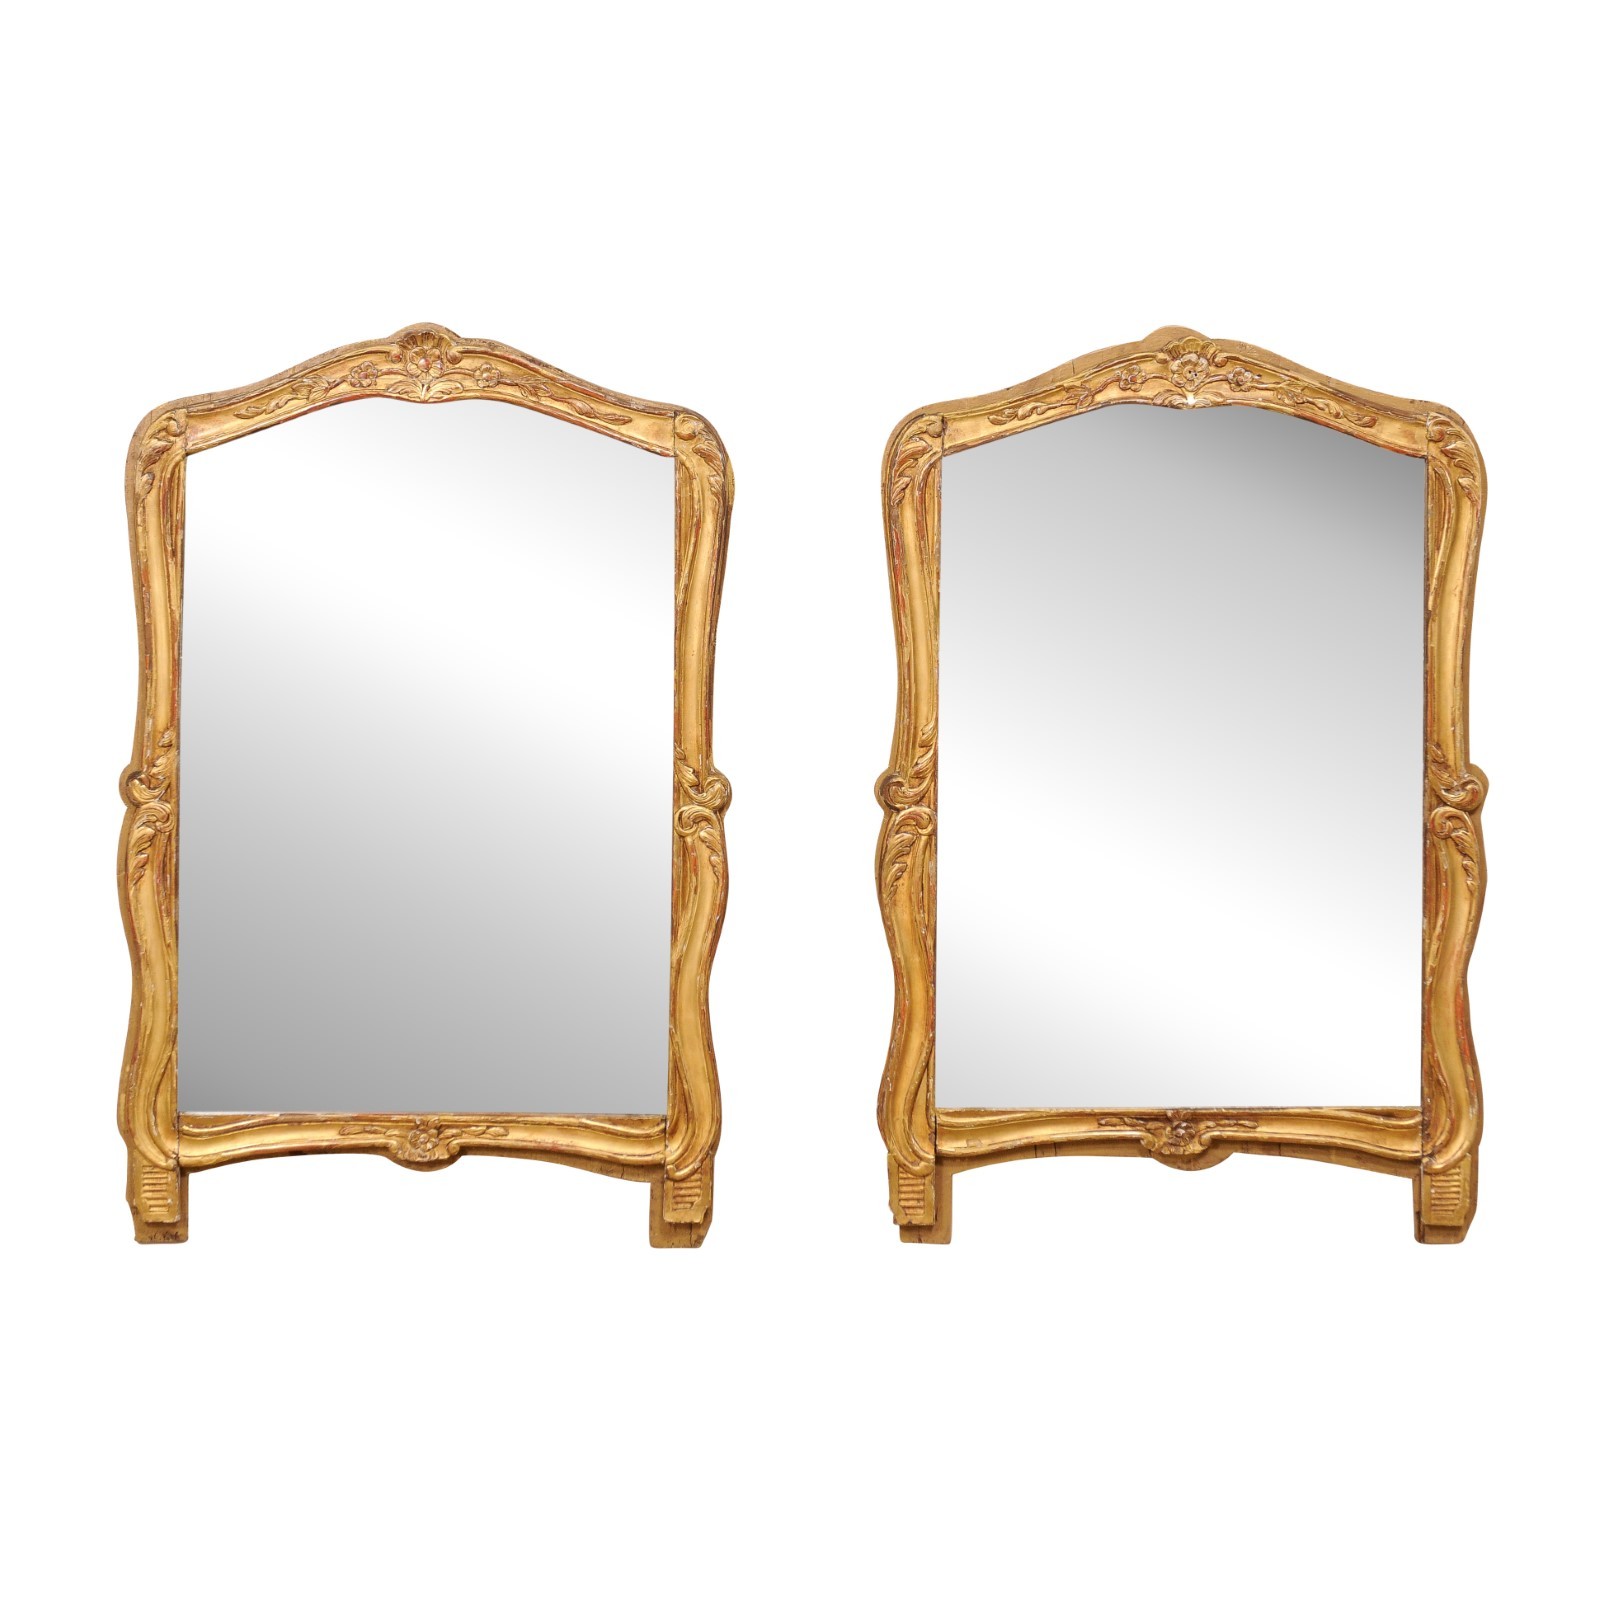 French 19th C. Carved & Gilt Wood Mirrors 